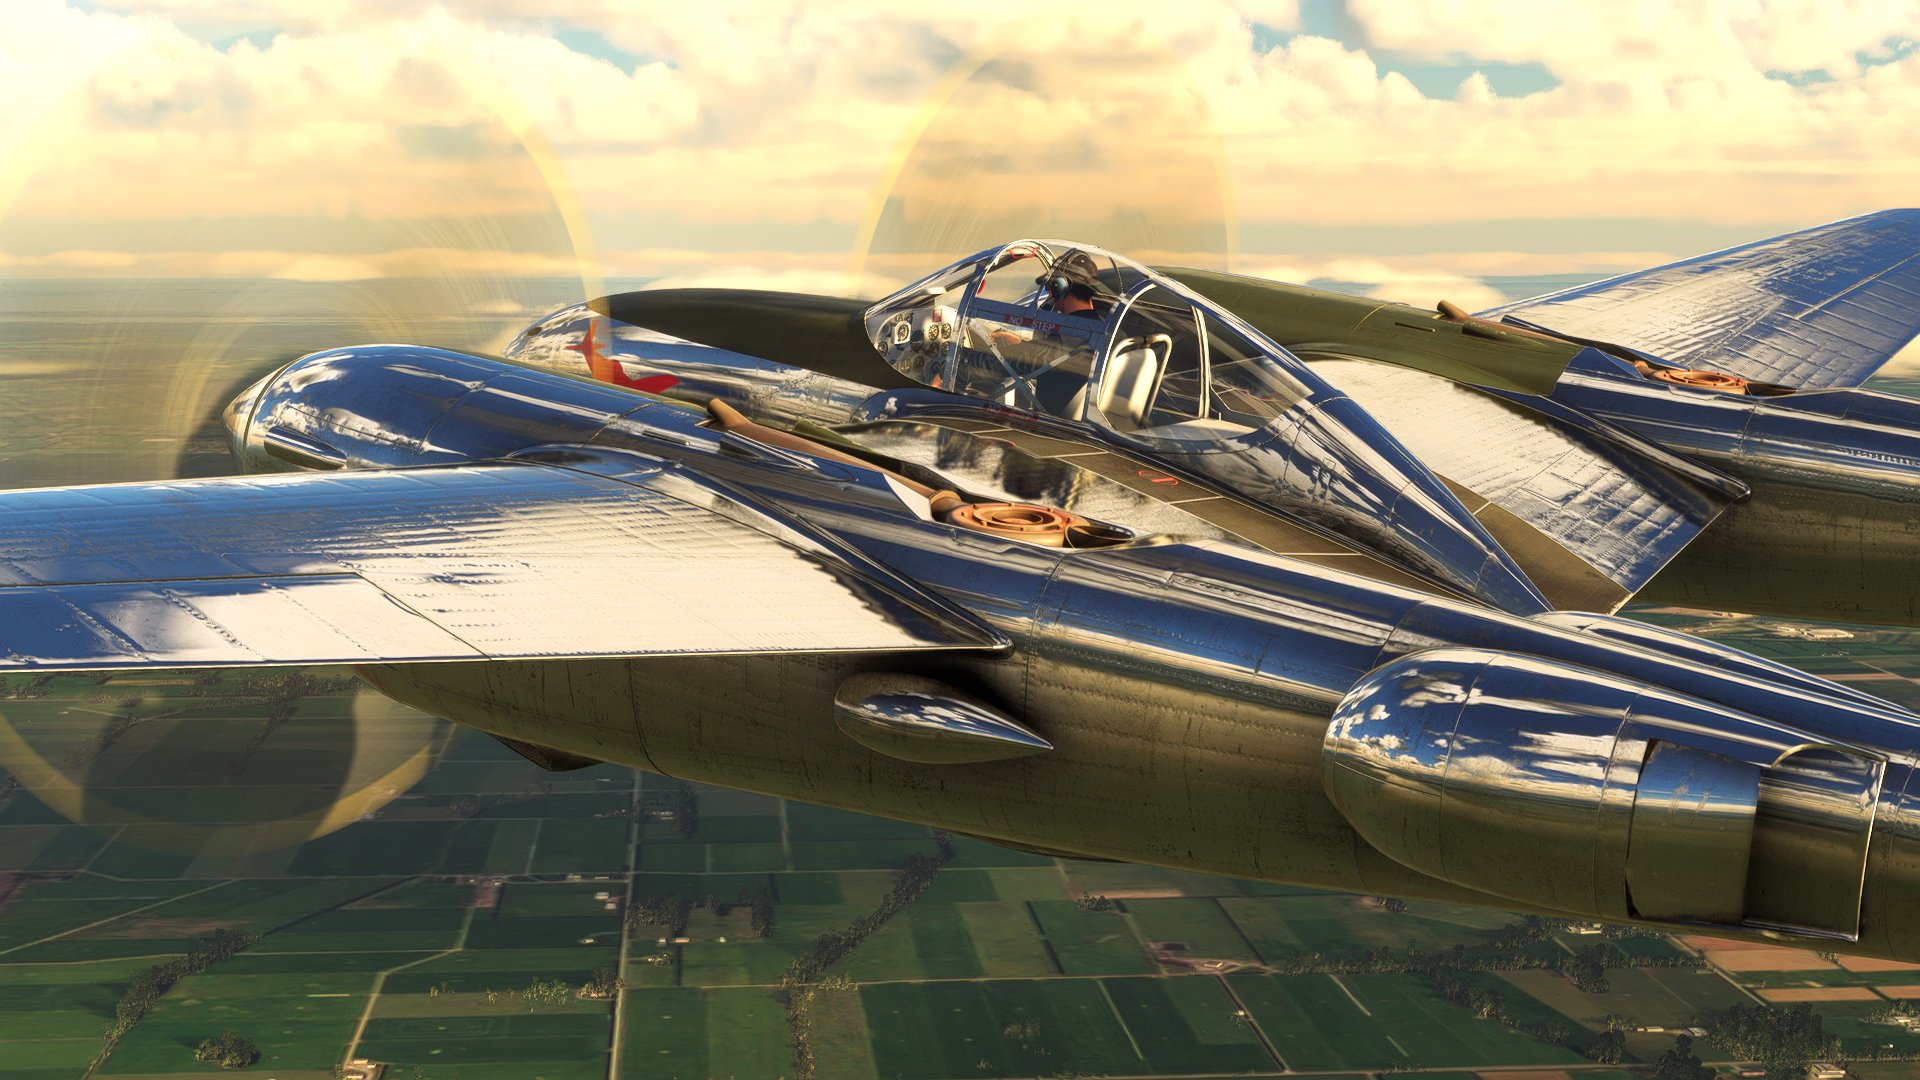 A P-38 Lightning with a reflective metallic finish flies over a green countryside.